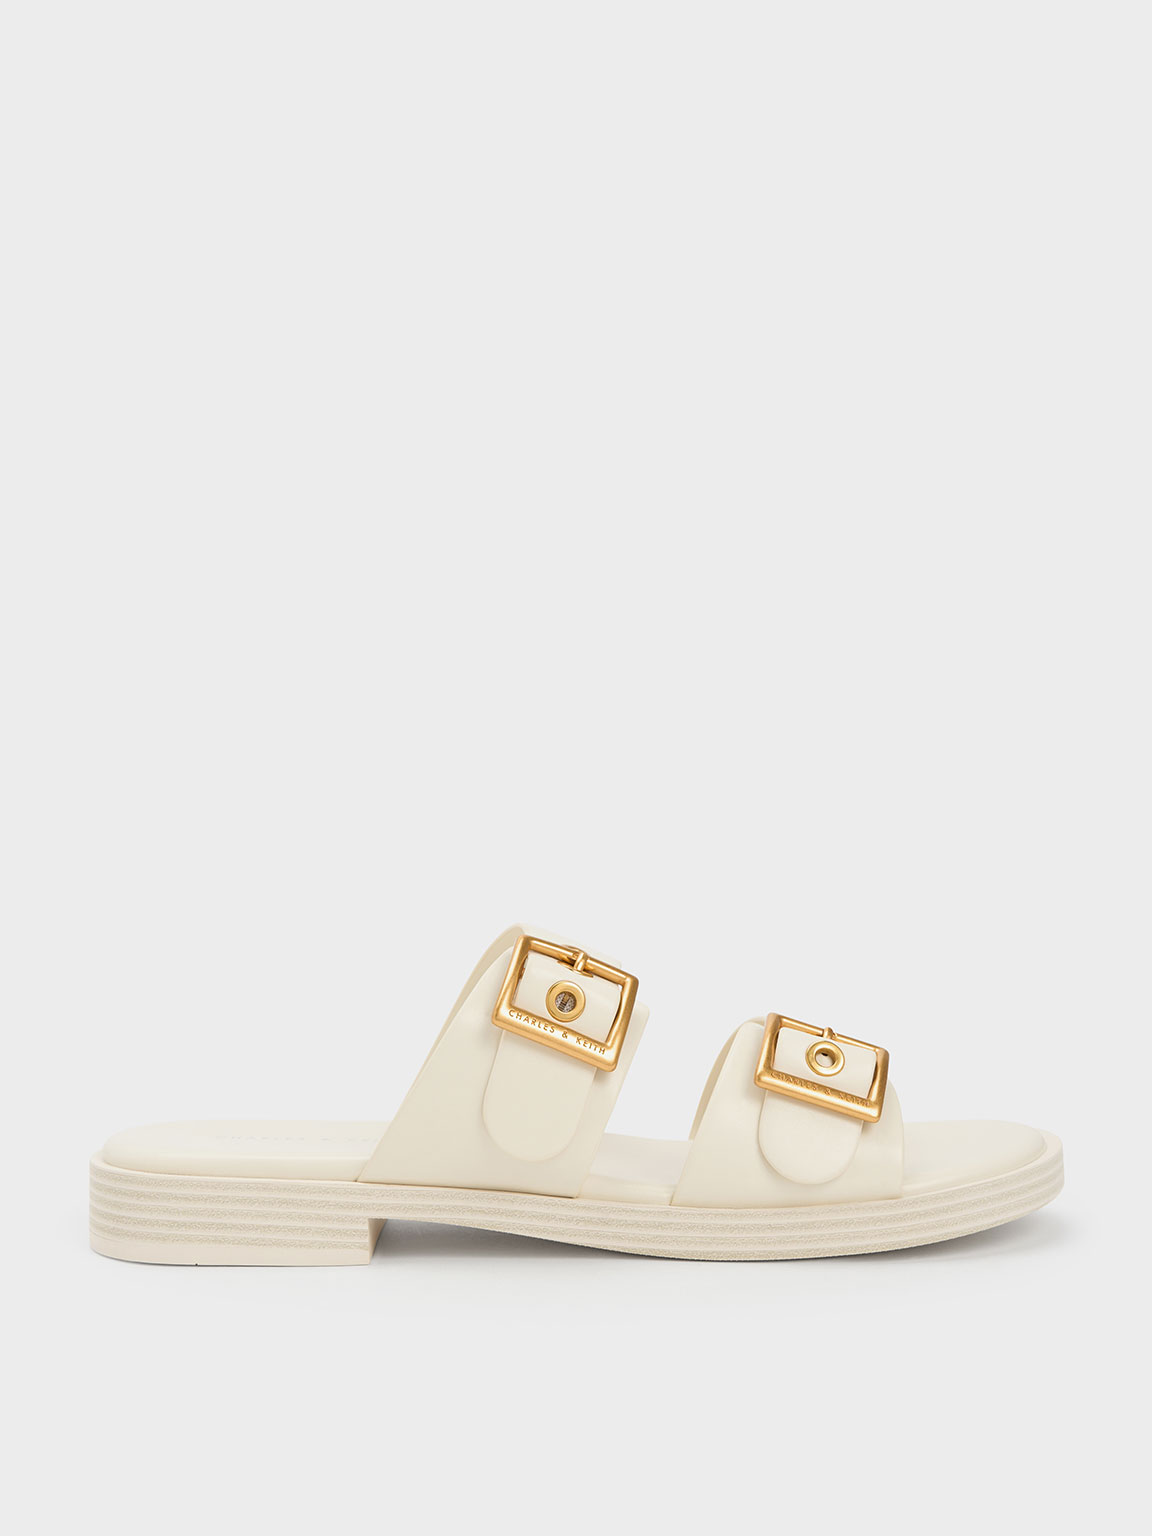 White Buckled Double Strap Slide Sandals - CHARLES & KEITH TH